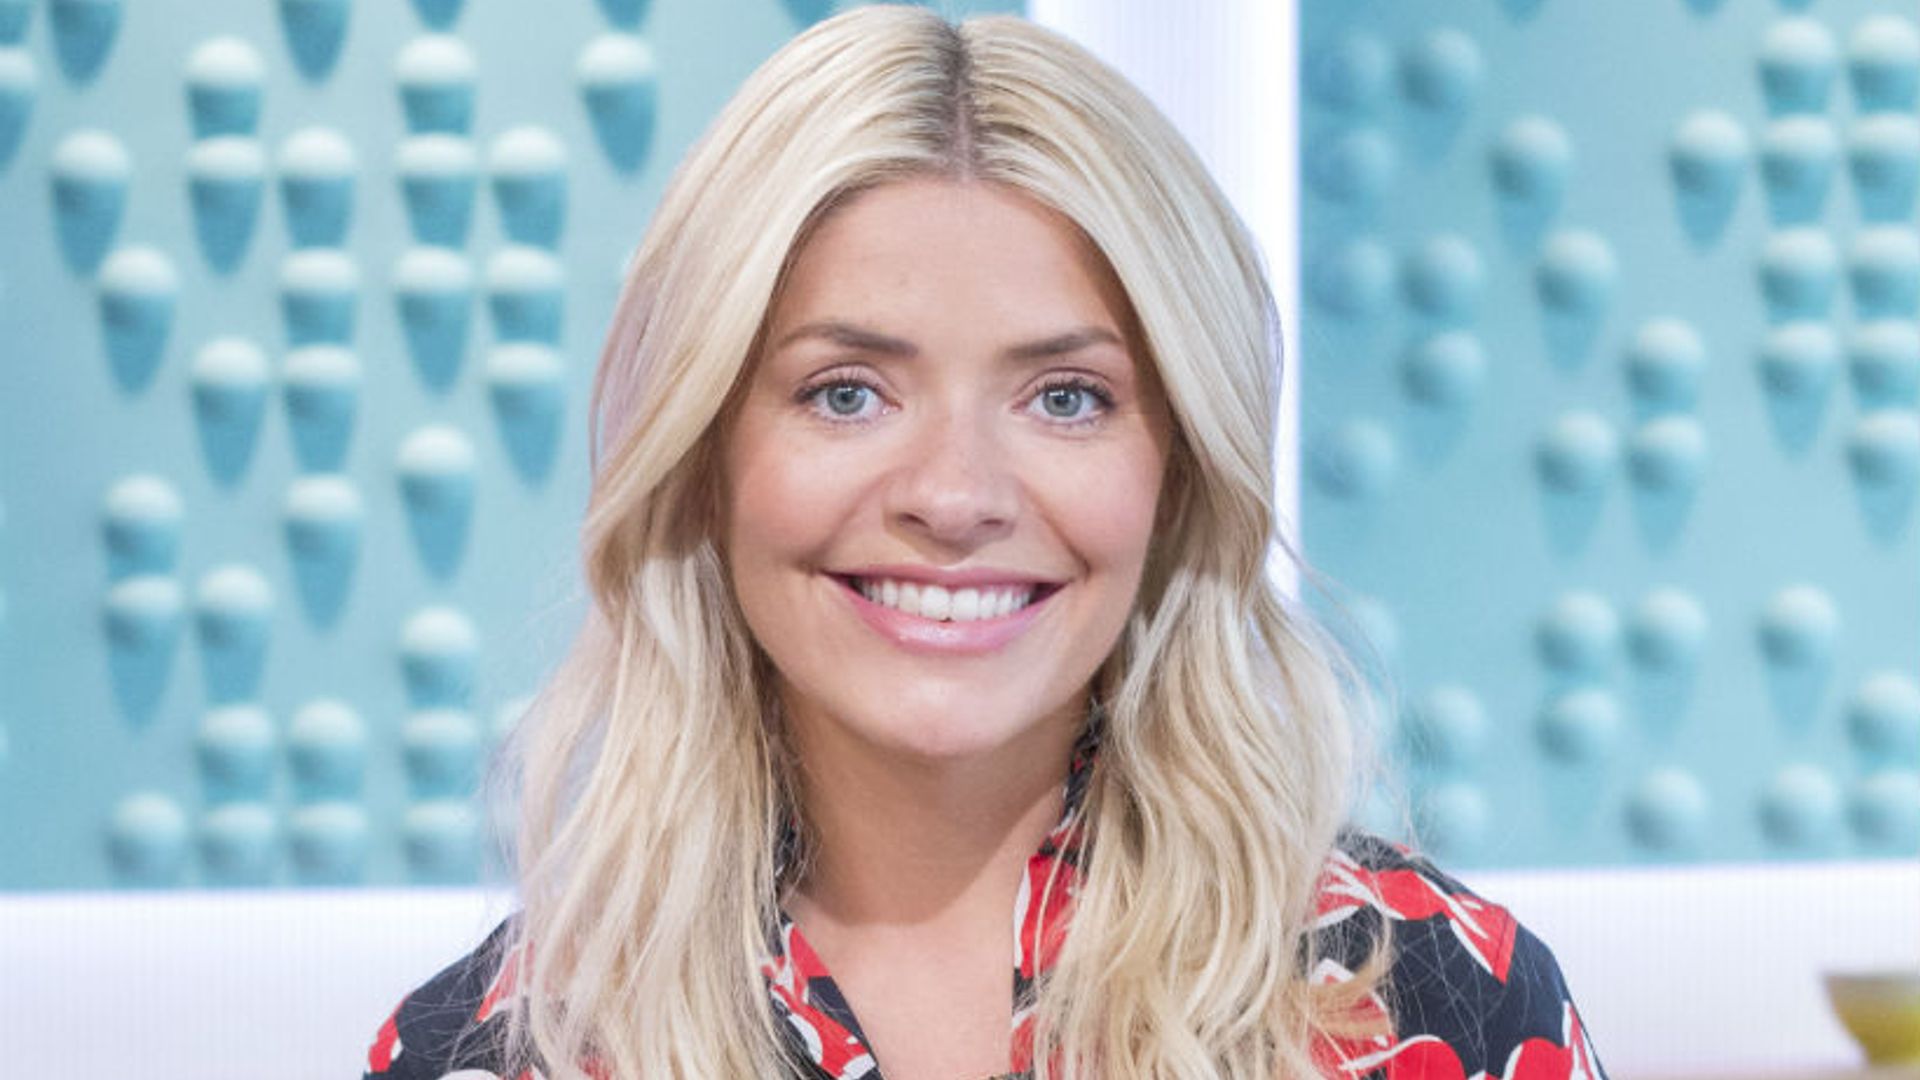 Holly Willoughby sets off to Dancing on Ice in brightest outfit yet